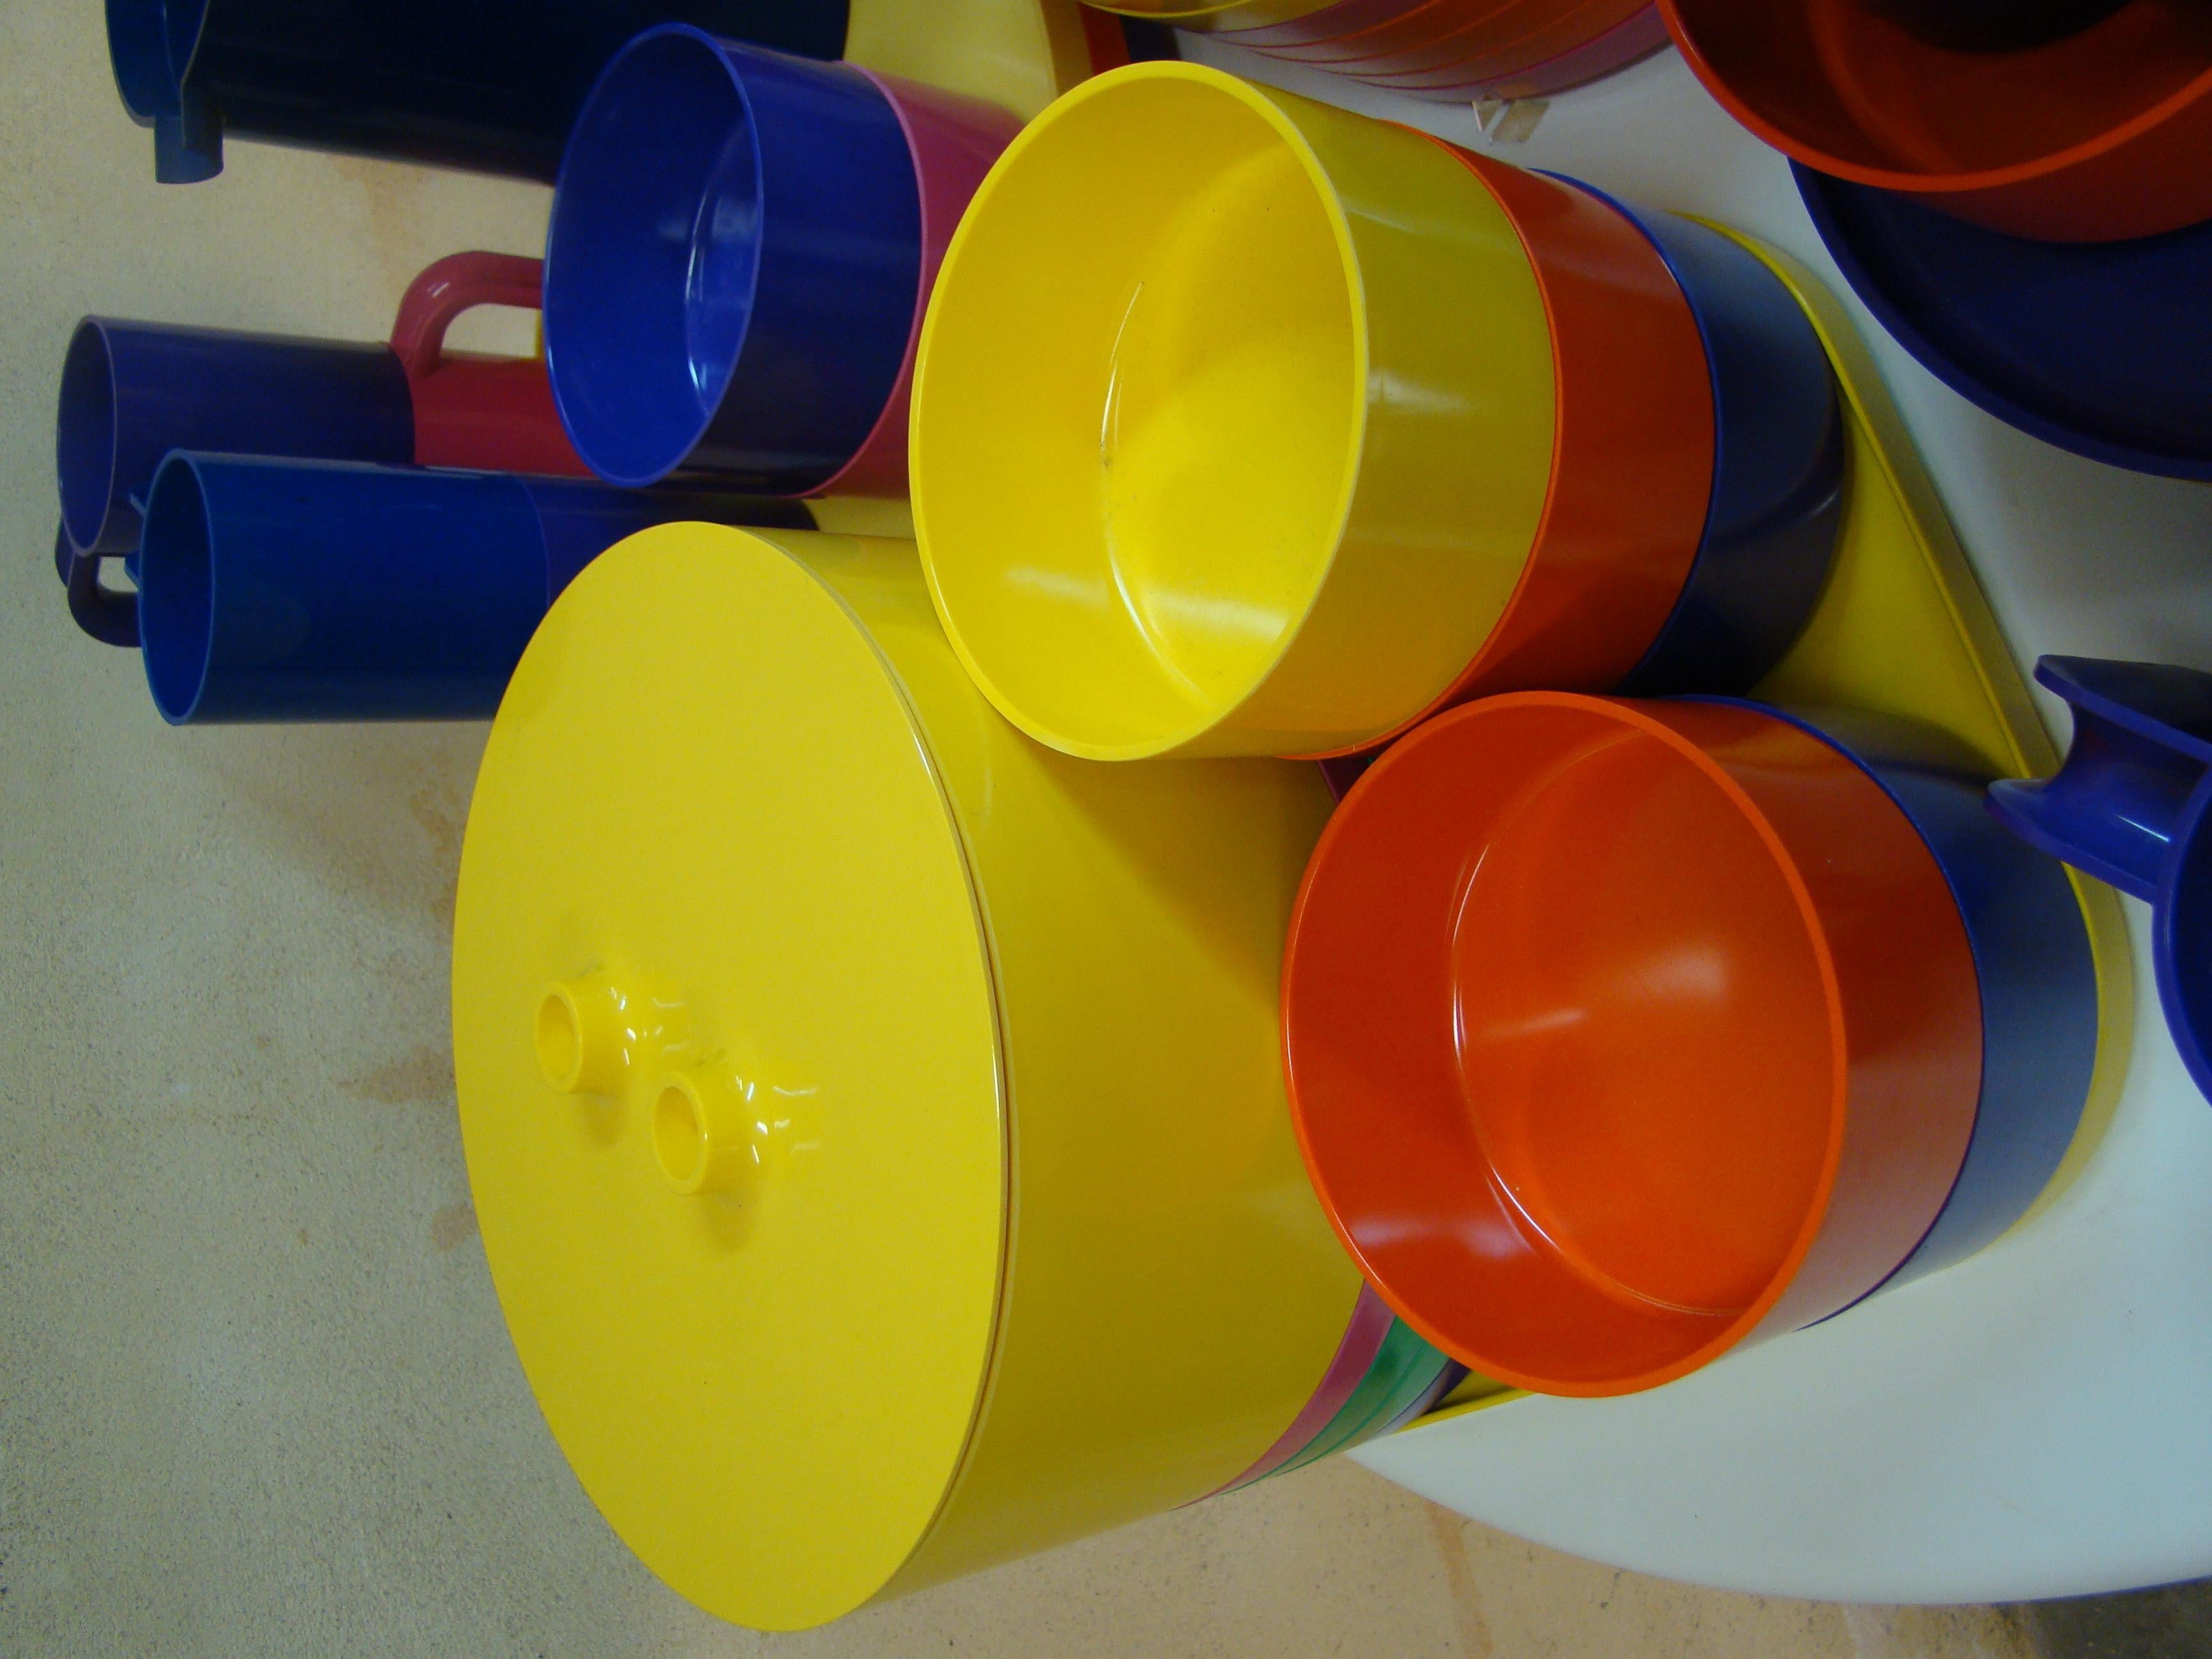 Colorful Assortment of Dinnerware by Massimo Vignelli for Heller Design 2